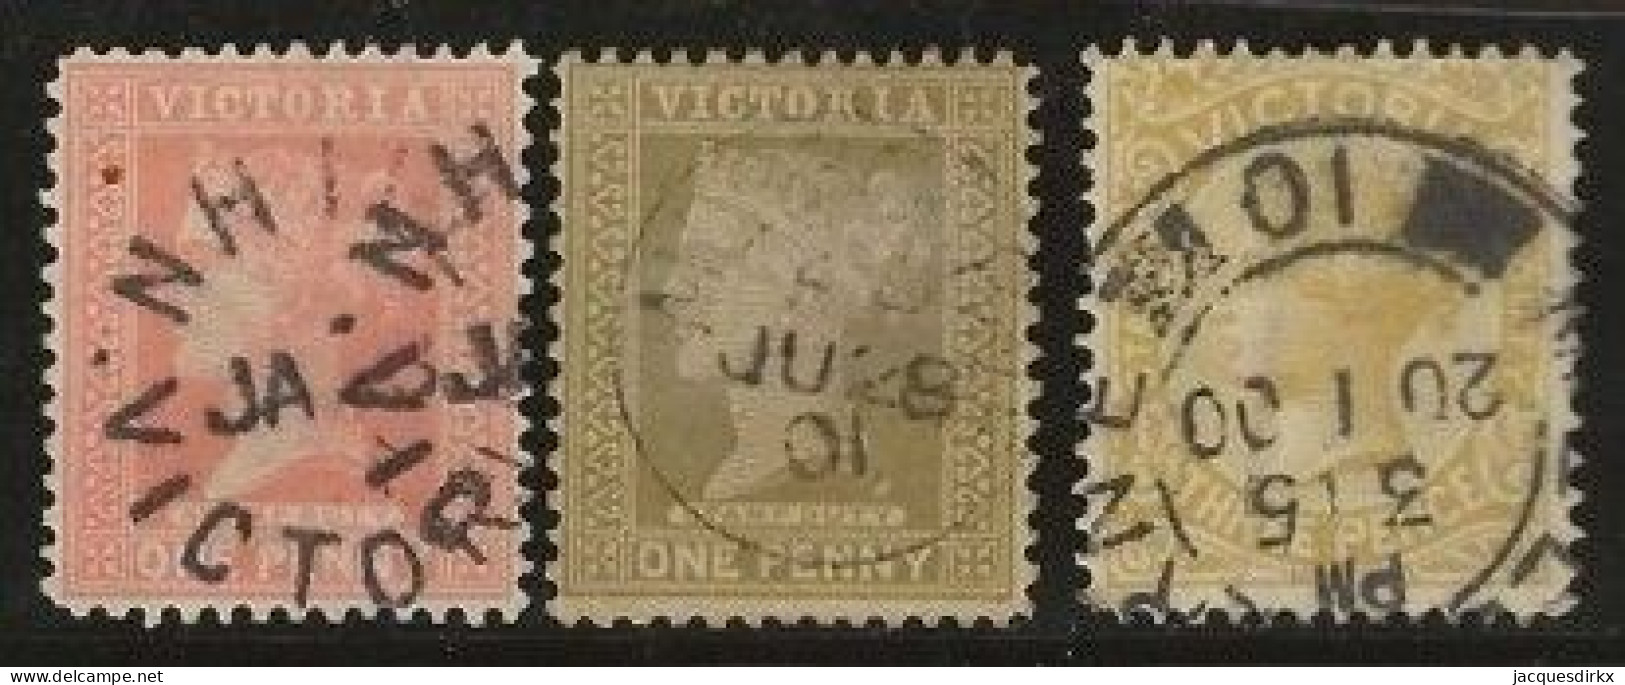 Victoria    .   SG    .   3 Stamps    .   O      .     Cancelled - Used Stamps